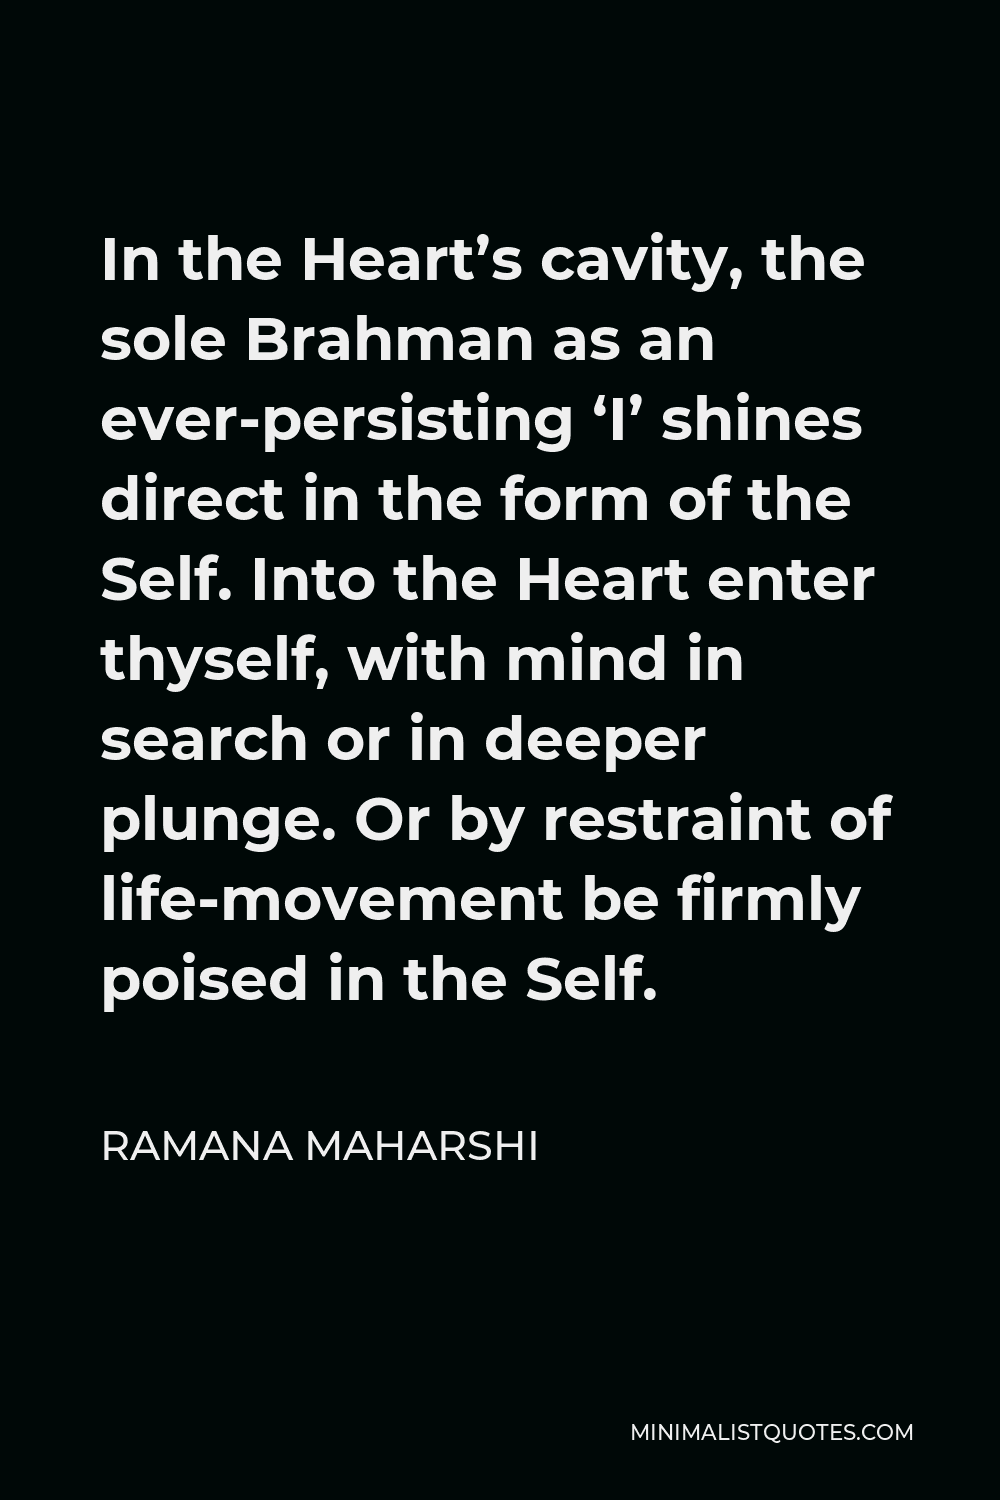 Ramana Maharshi Quote - In the Heart’s cavity, the sole Brahman as an ever-persisting ‘I’ shines direct in the form of the Self. Into the Heart enter thyself, with mind in search or in deeper plunge. Or by restraint of life-movement be firmly poised in the Self.